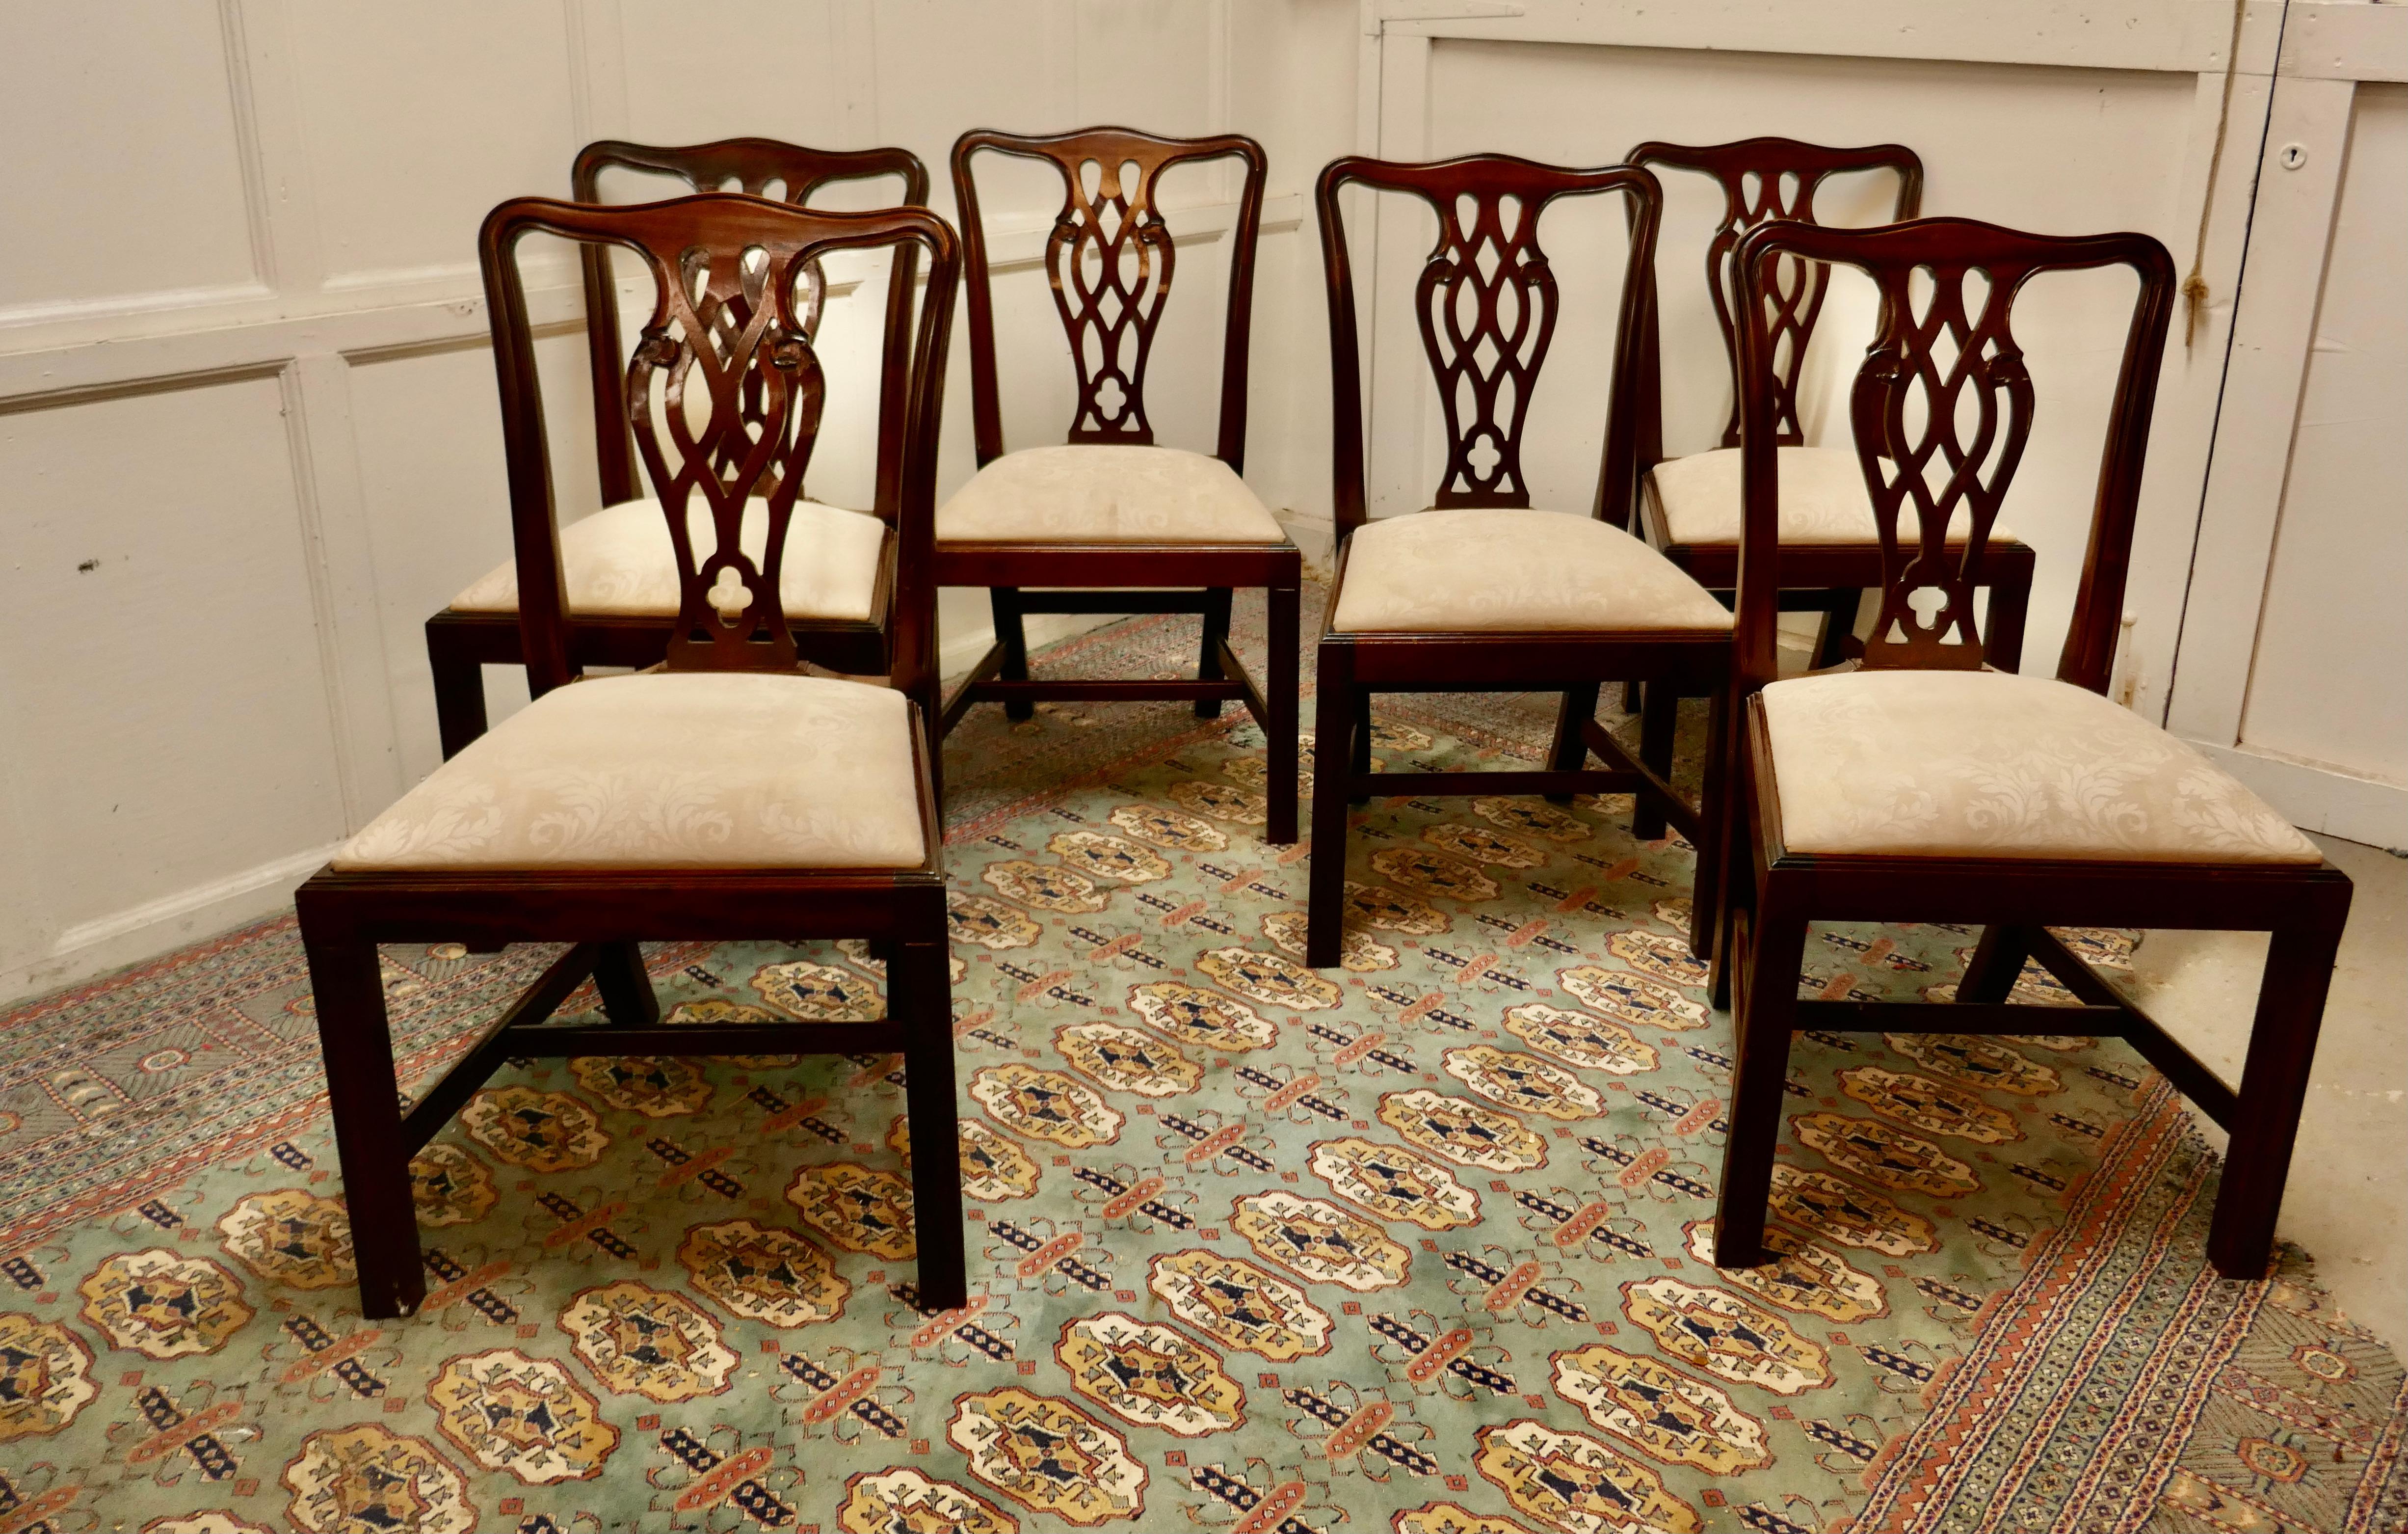 A set of 6 good quality Chippendale style Mahogany dining chairs 

The chairs are a classic Georgian design and made in Mahogany they have a pierced Back Splat and are roomy and comfortable, the seats are the ‘drop in’ type and have cream brocade